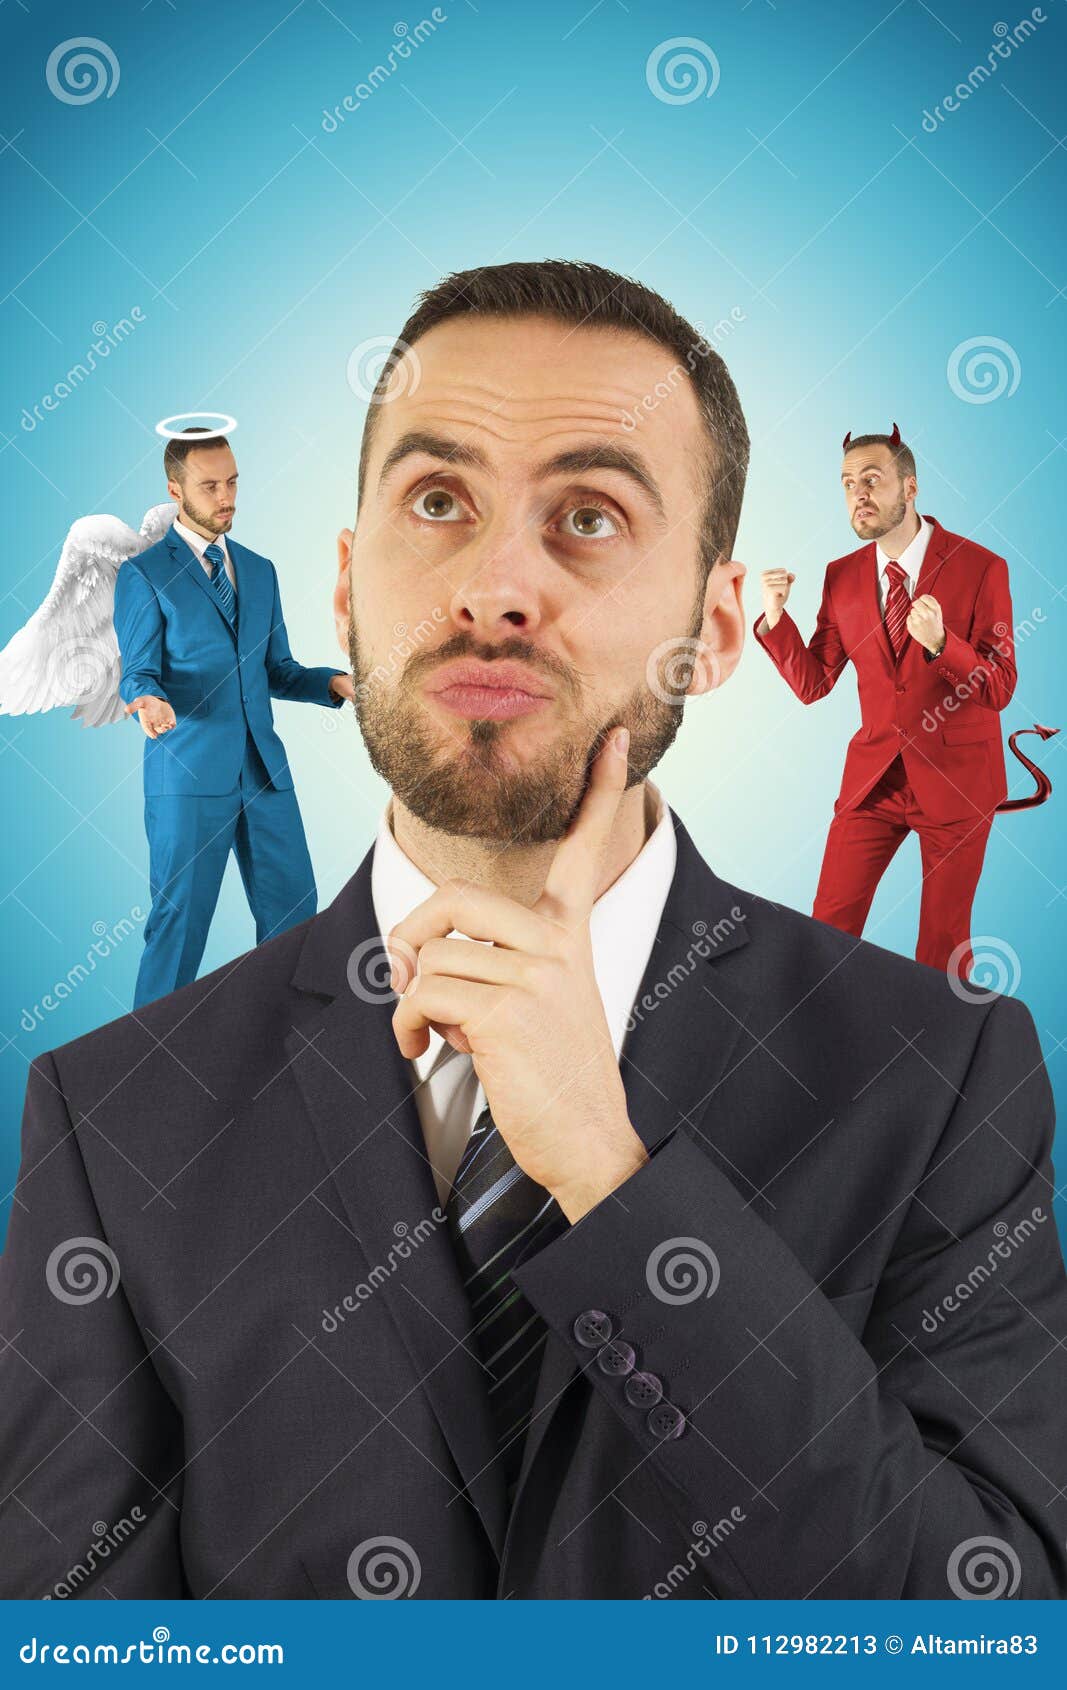 businessman with angel and devil on his shoulders.